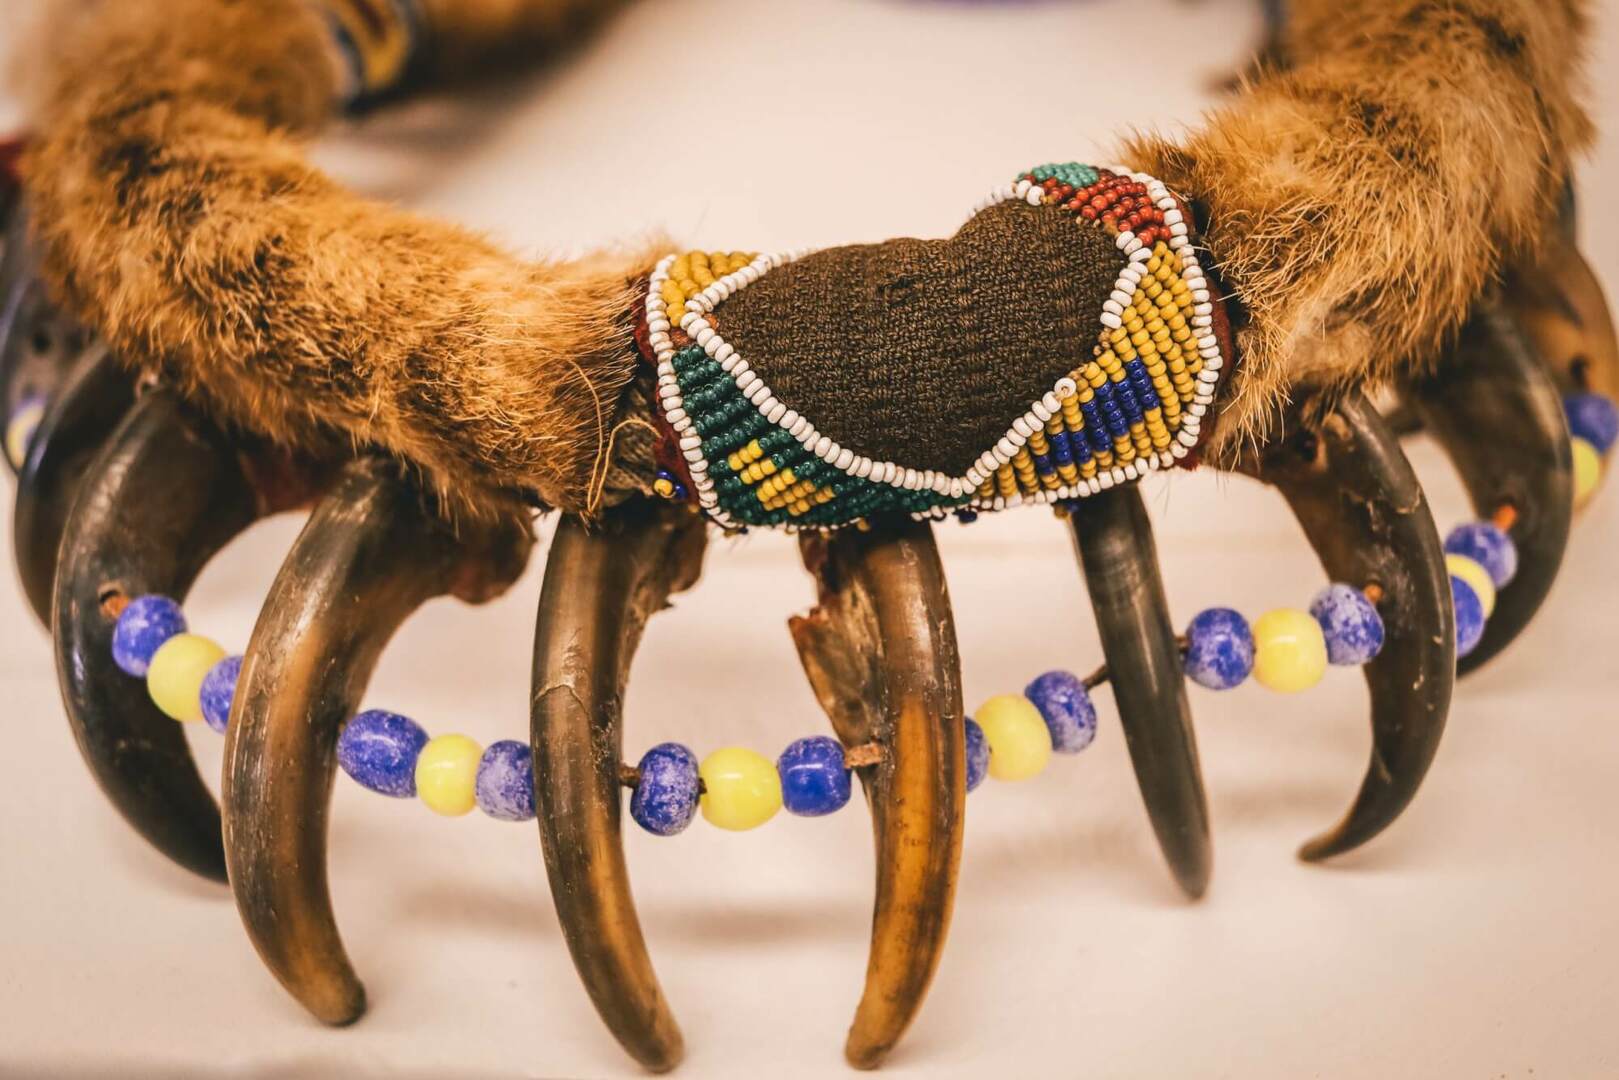 Close up of a beaded headdress with bear claws